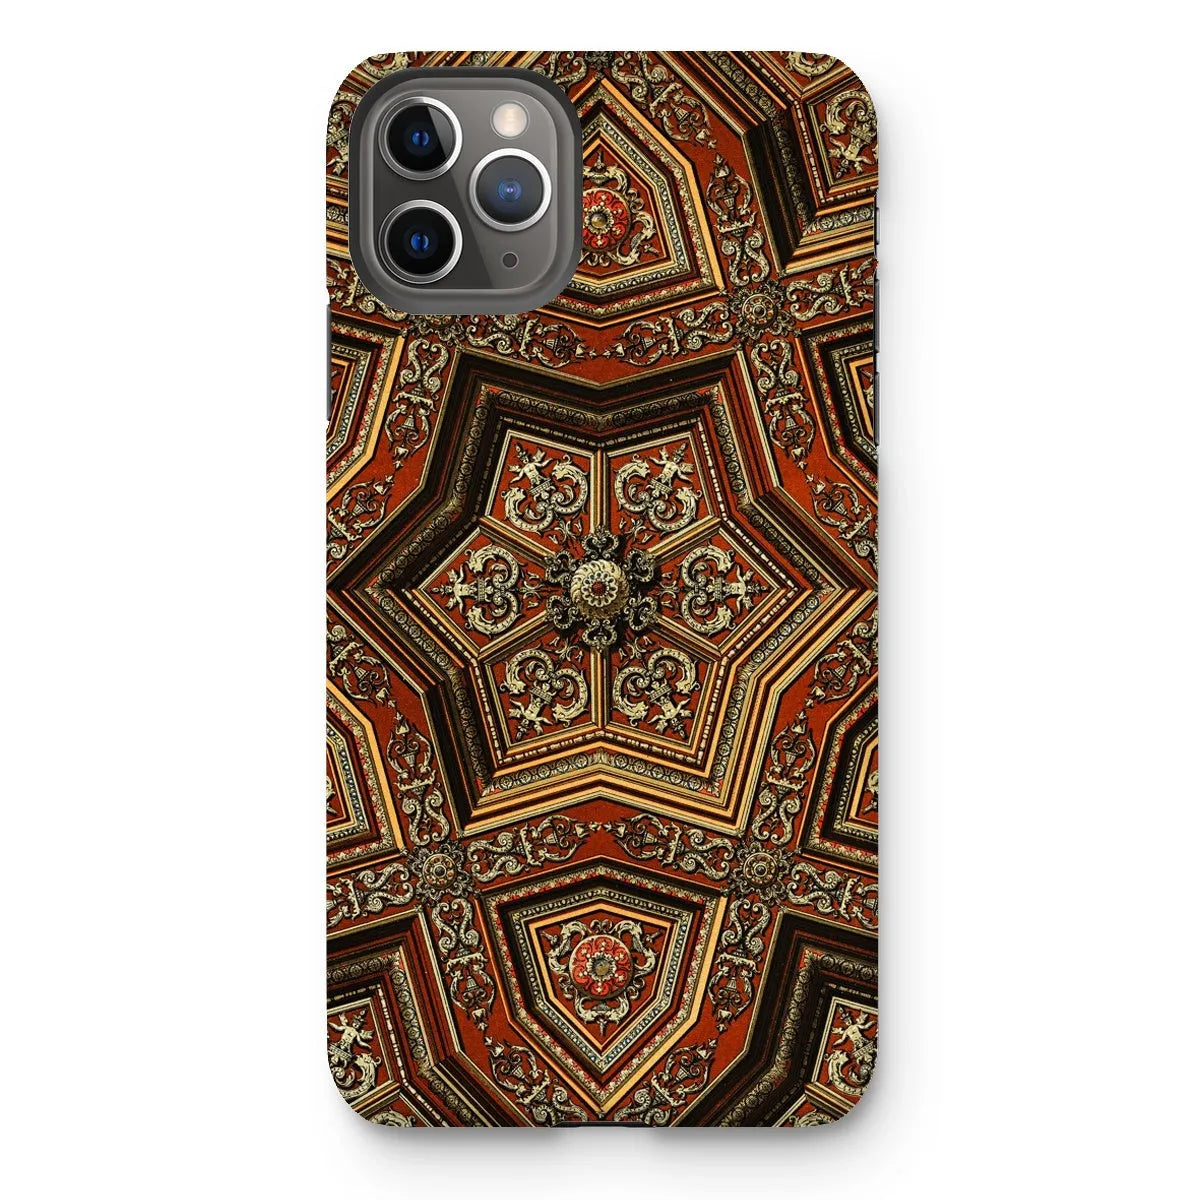 Renaissance Pattern By Auguste Racinet Tough Phone Case - Iphone 11 Pro Max / Gloss - Mobile Phone Cases - Aesthetic Art